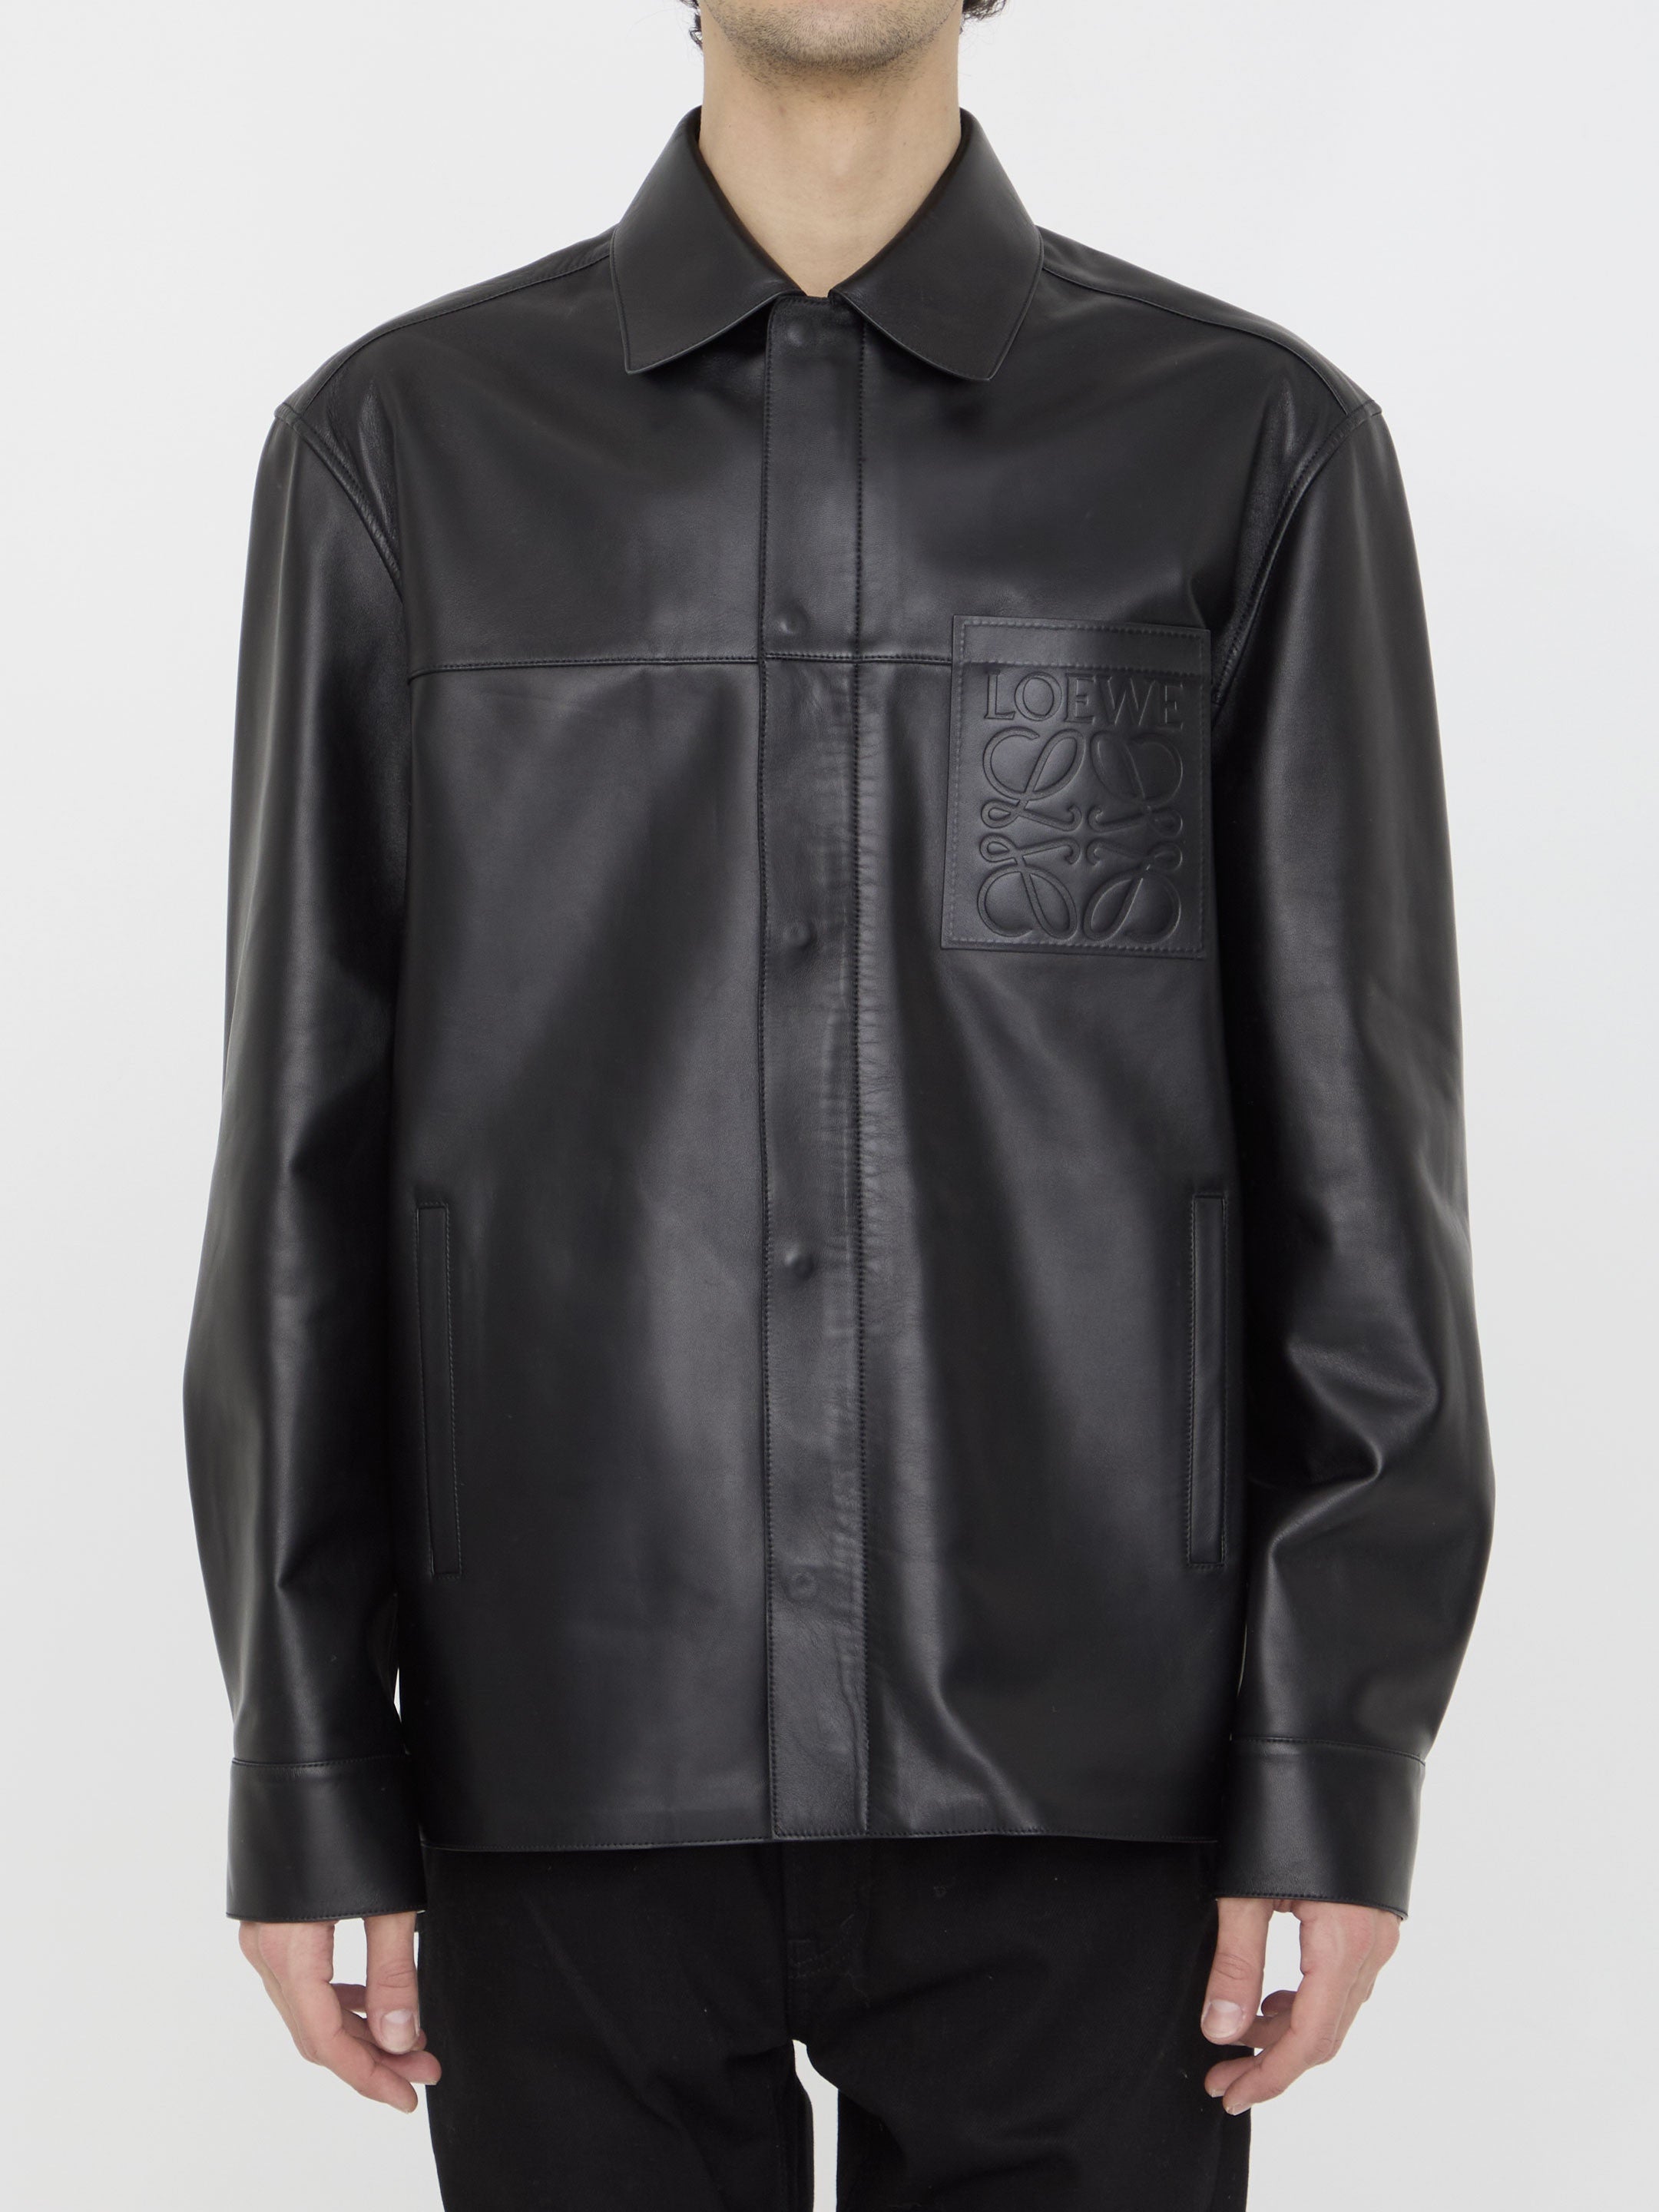 LOEWE-OUTLET-SALE-Leather-overshirt-Shirts-46-BLACK-ARCHIVE-COLLECTION.jpg